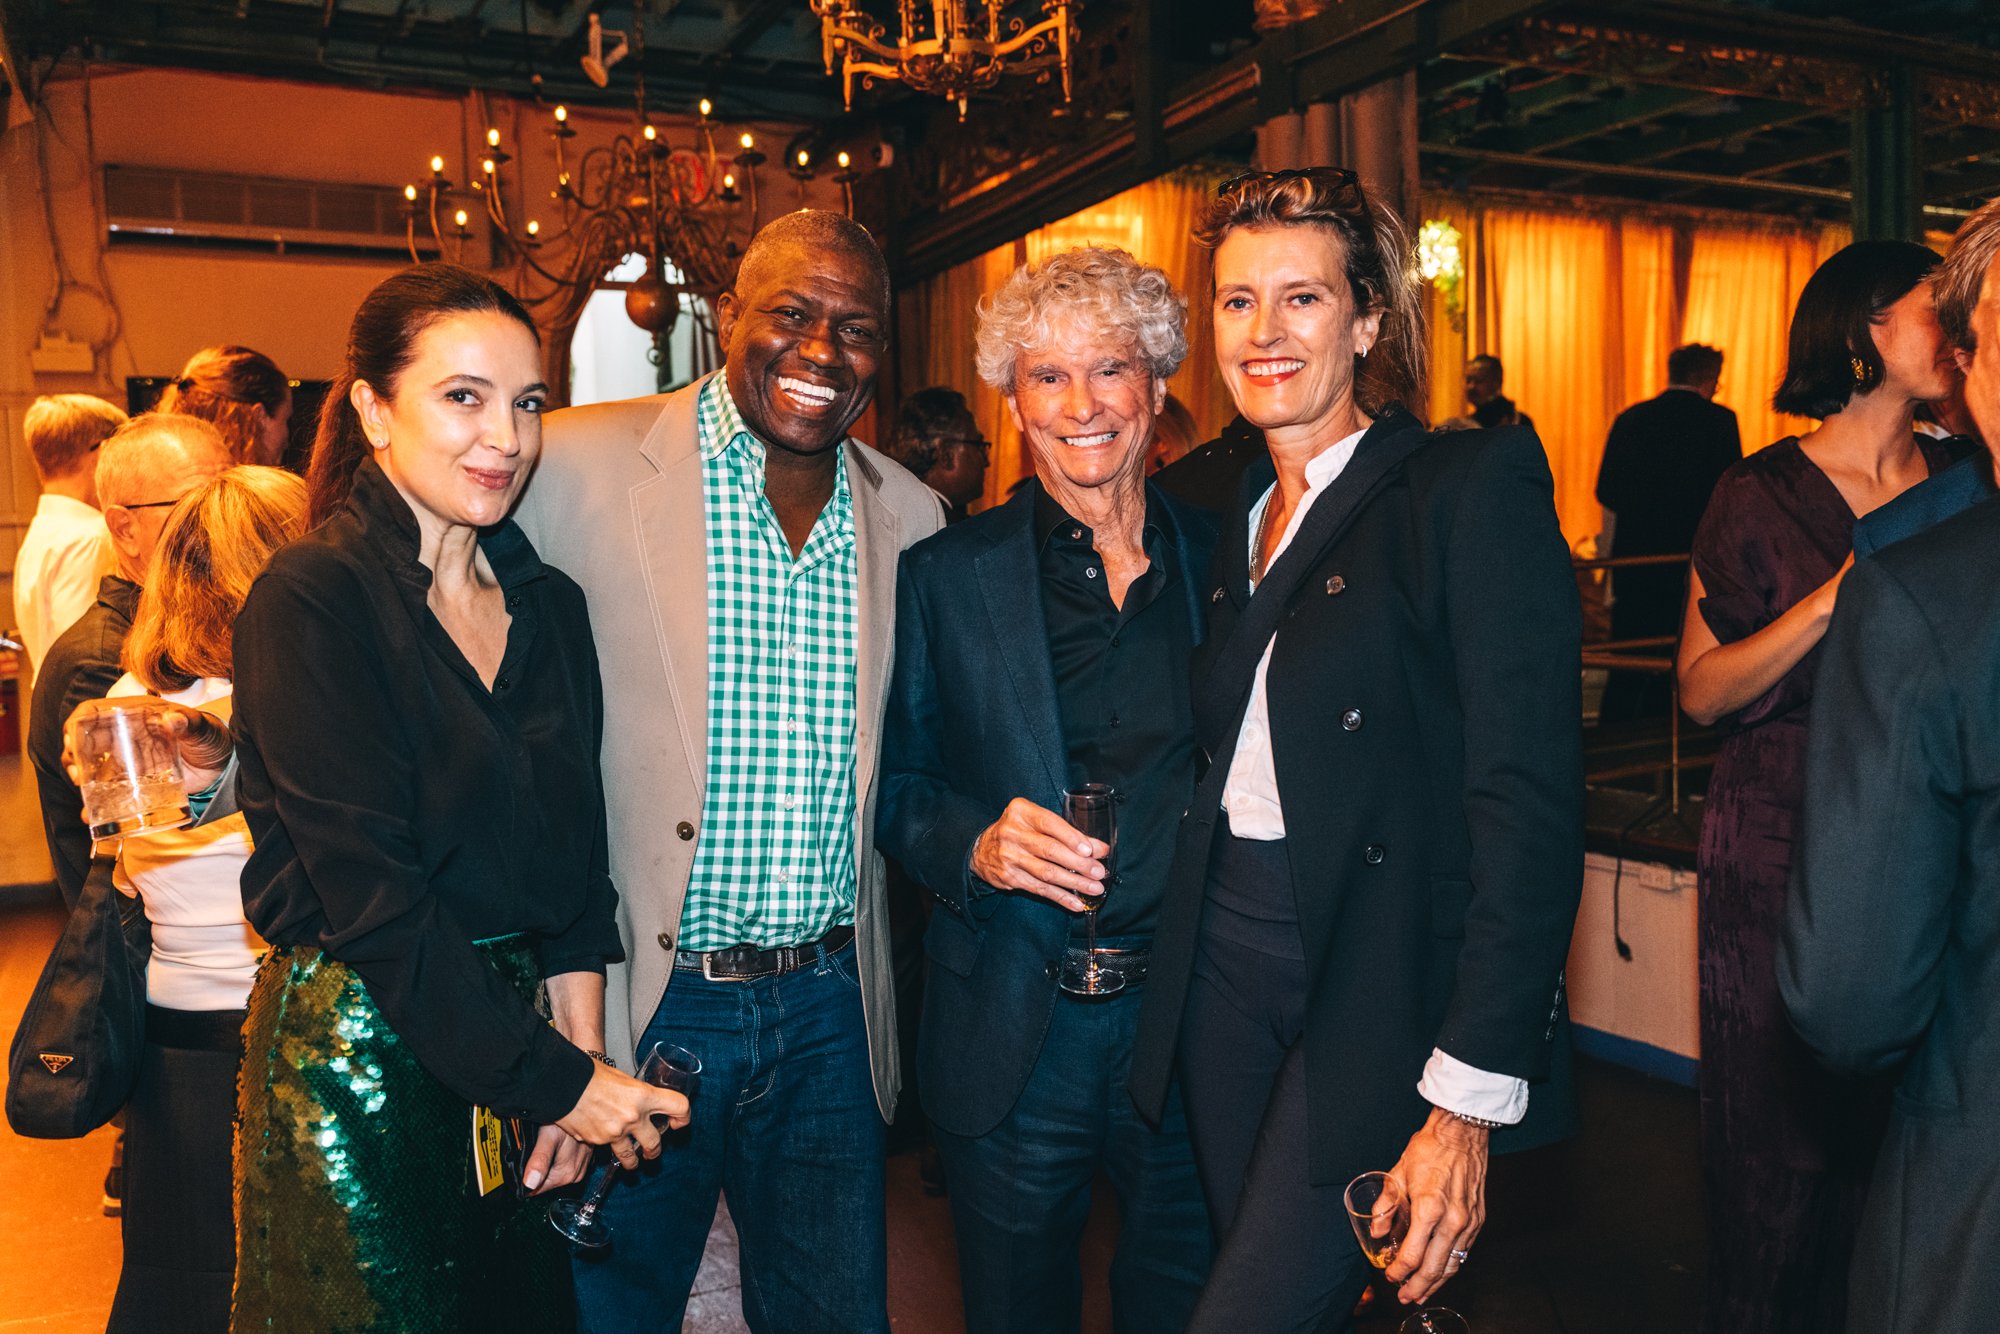 Clarice Tavares, Laurence Carty, Tony Bechara, and Désirée La Valette